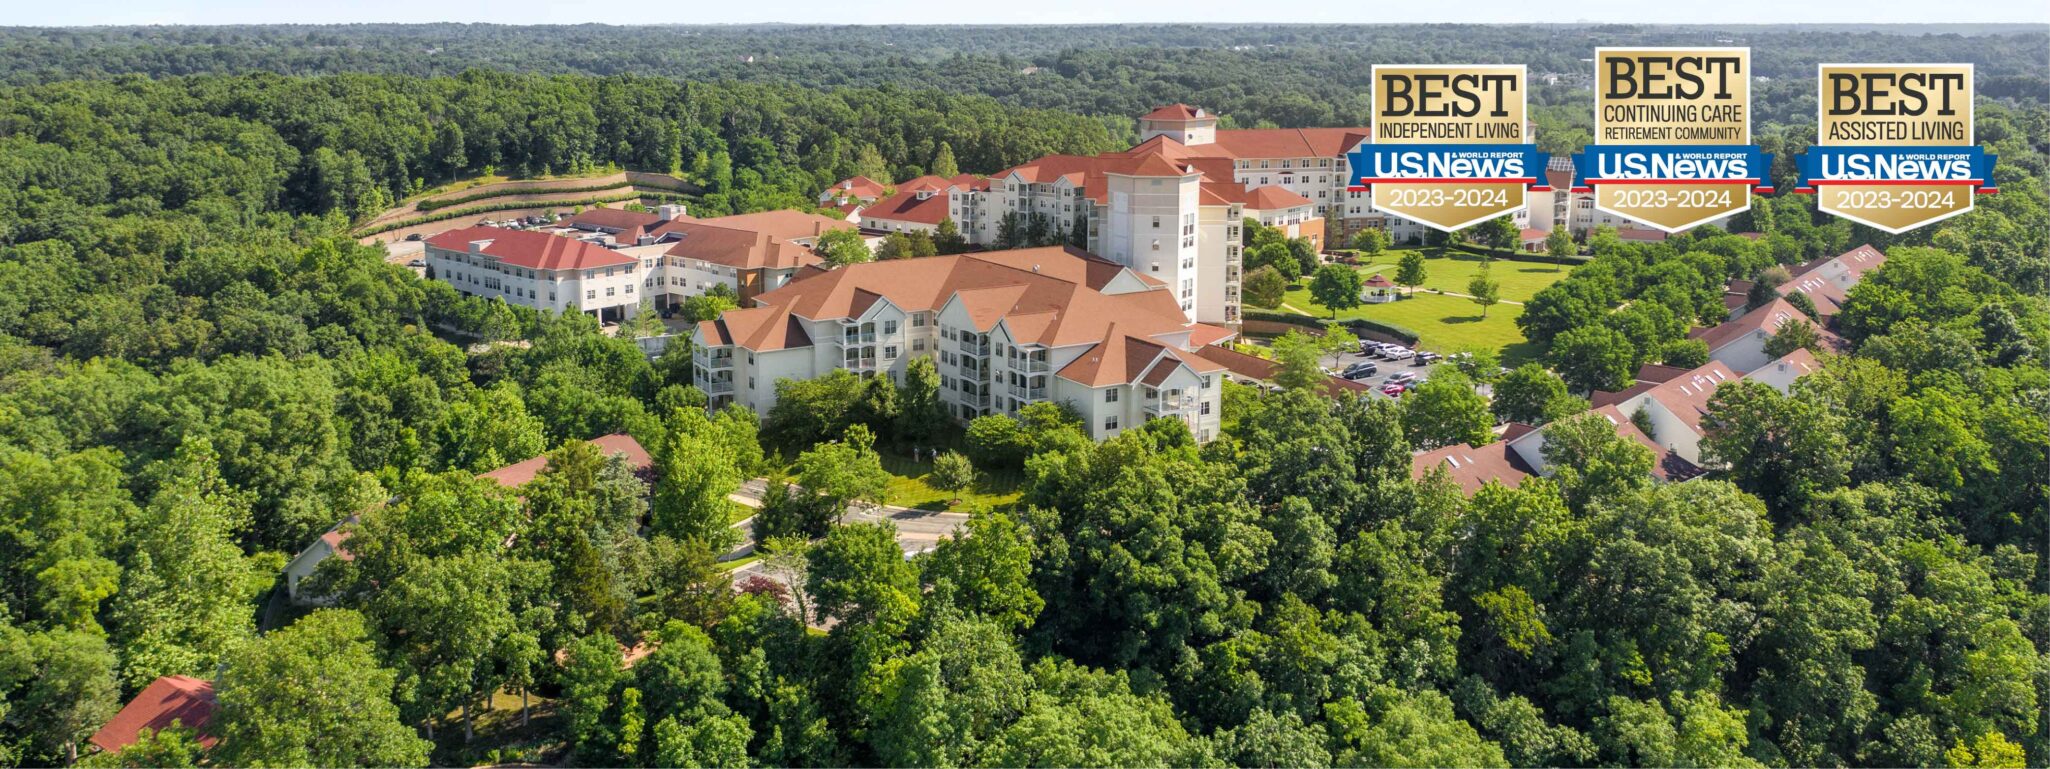 View overlooking the Meramec Bluffs community in Ballwin, MO, awarded Best Independent & Assisted Living and Continuing Care Retirement Community by US News.